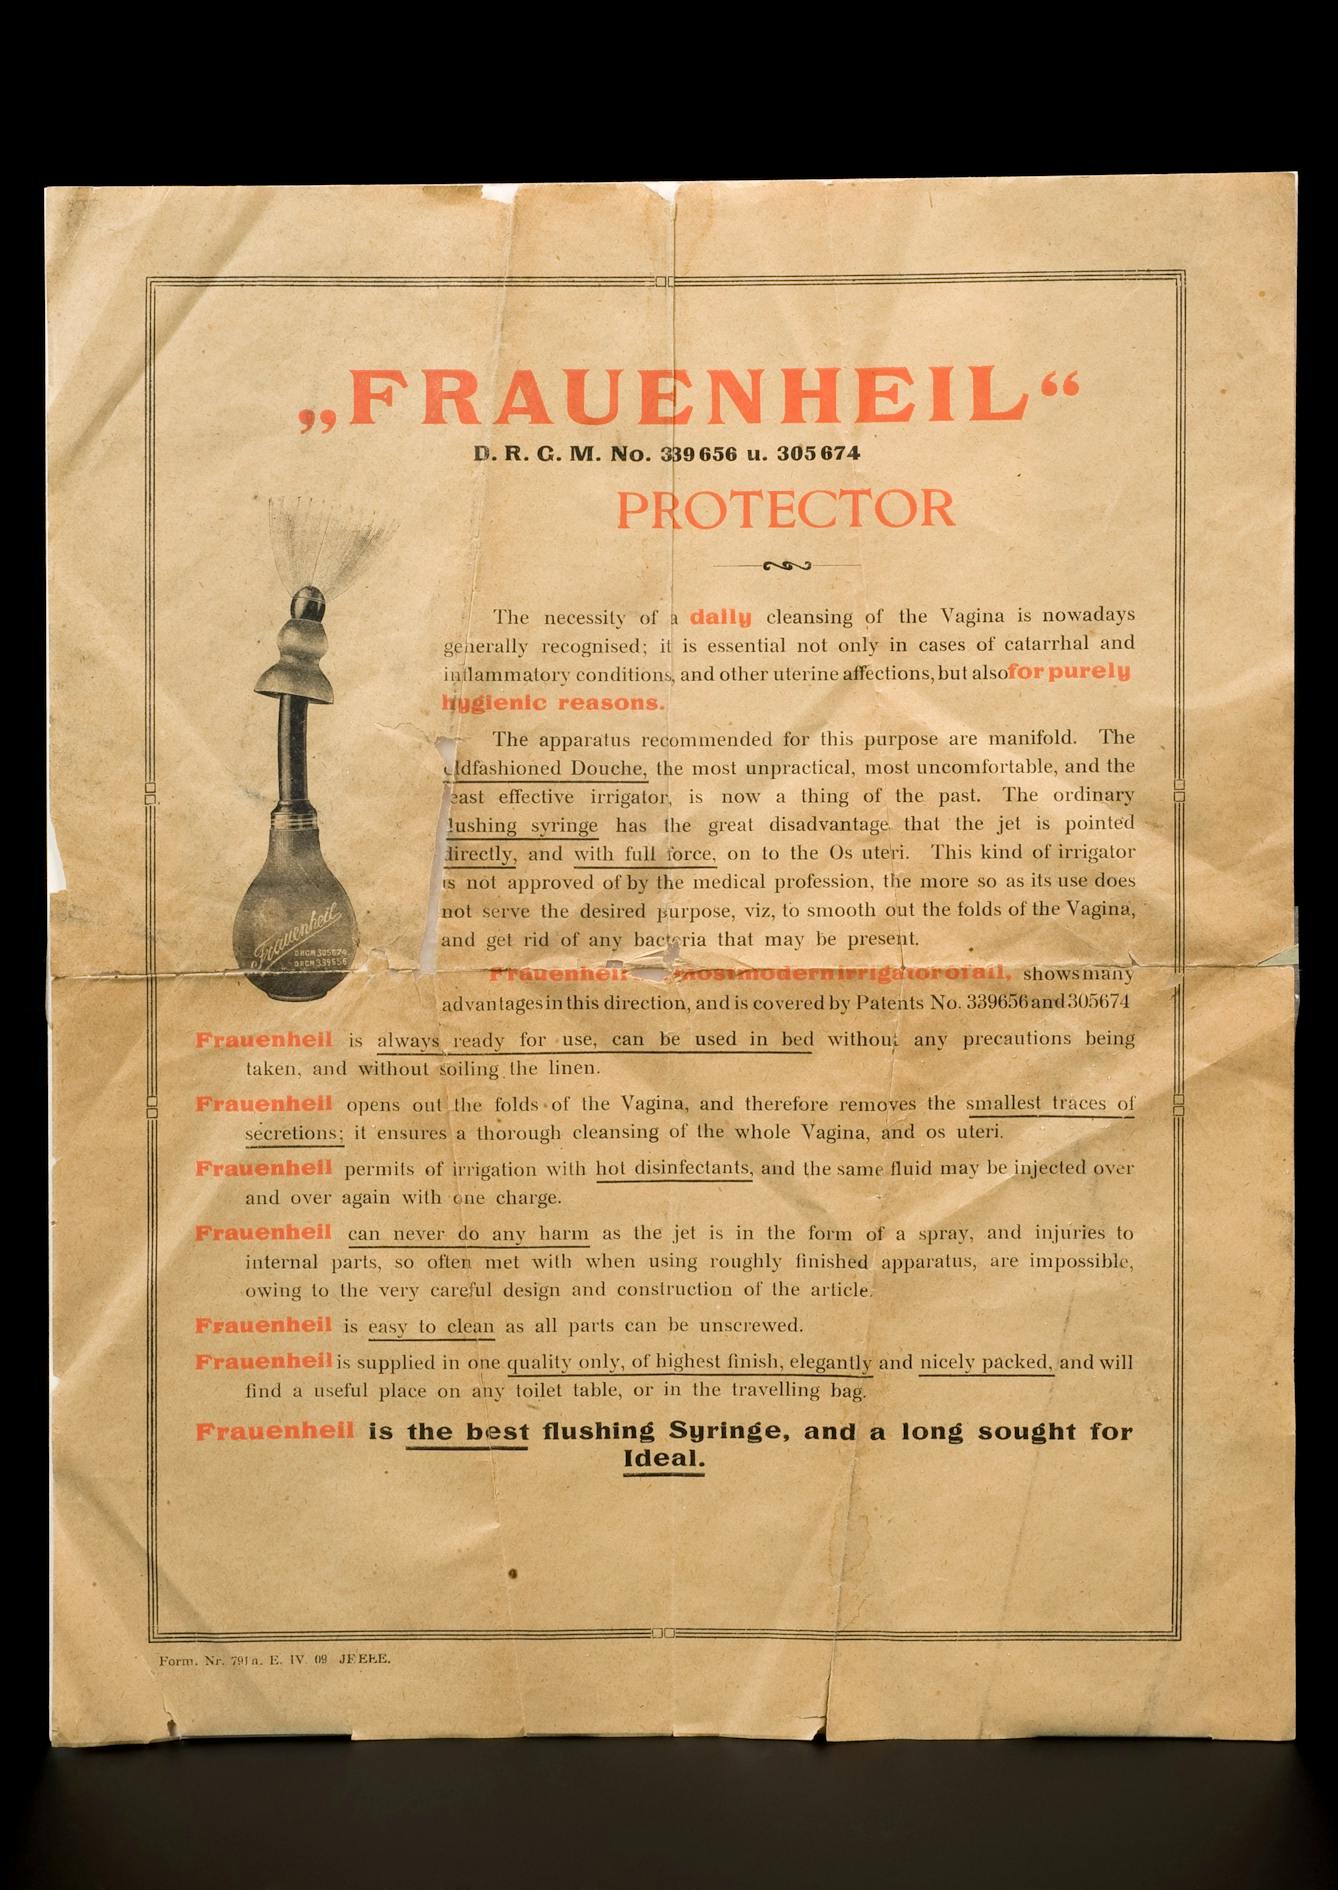 Photograph of a leaflet about the Frauenheil douche, Europe, 1895-1905, written in the early 1900s. "Frauenheil is the best flushing Syringe, and a long sought for Ideal". 